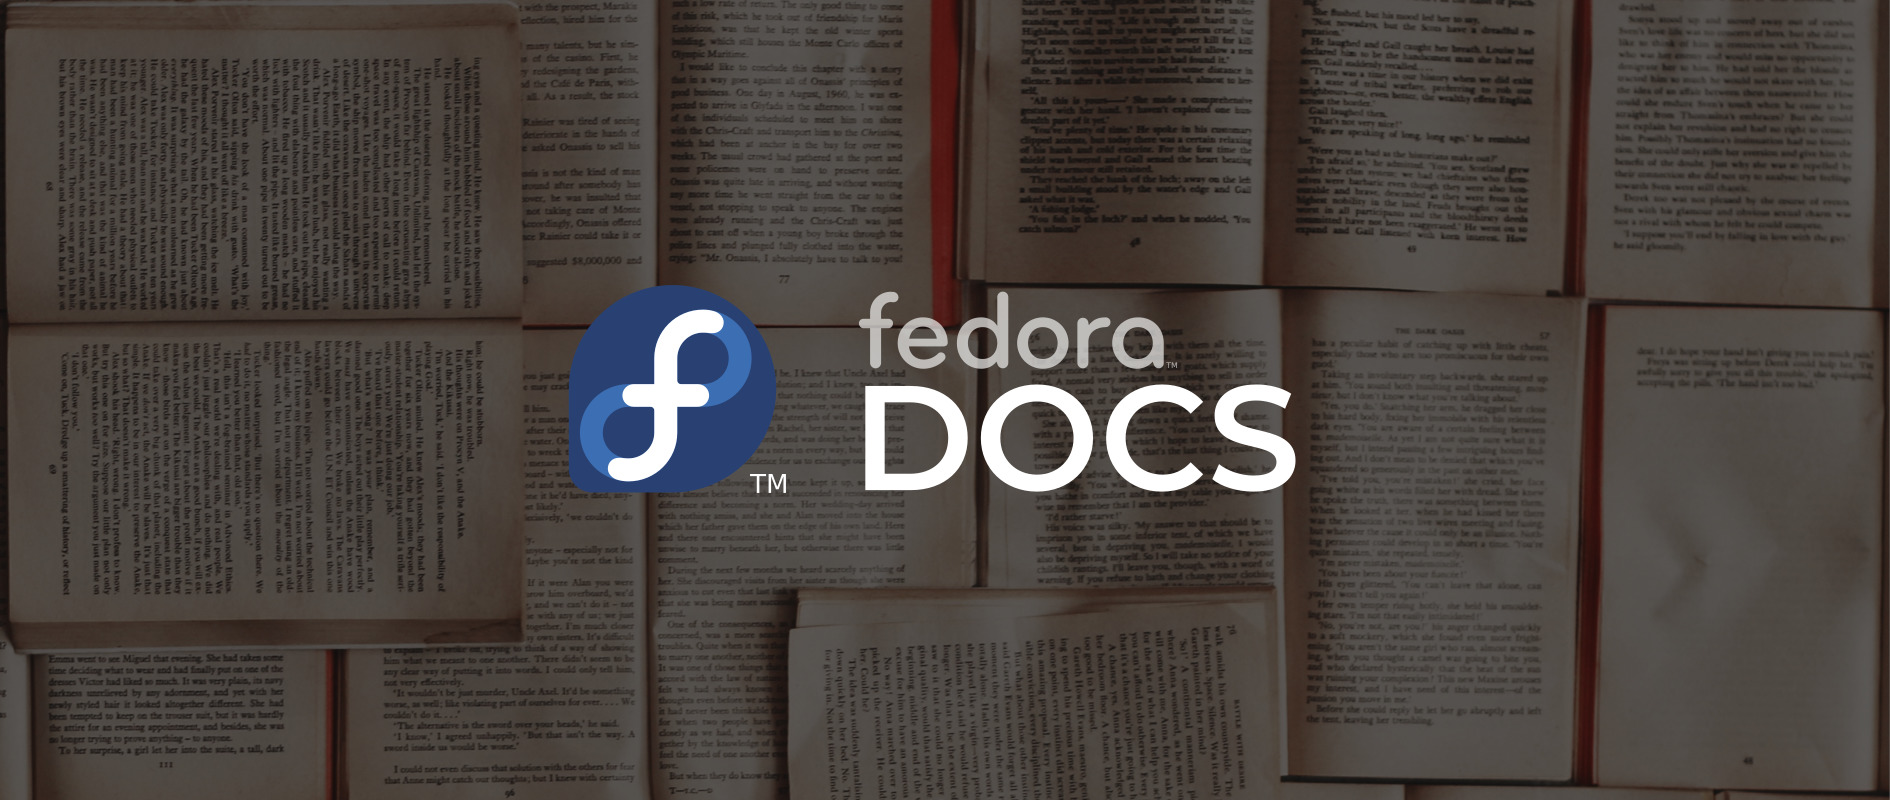 Fedora Documentation Team logo with Fedora Trademark; book pages in the background.